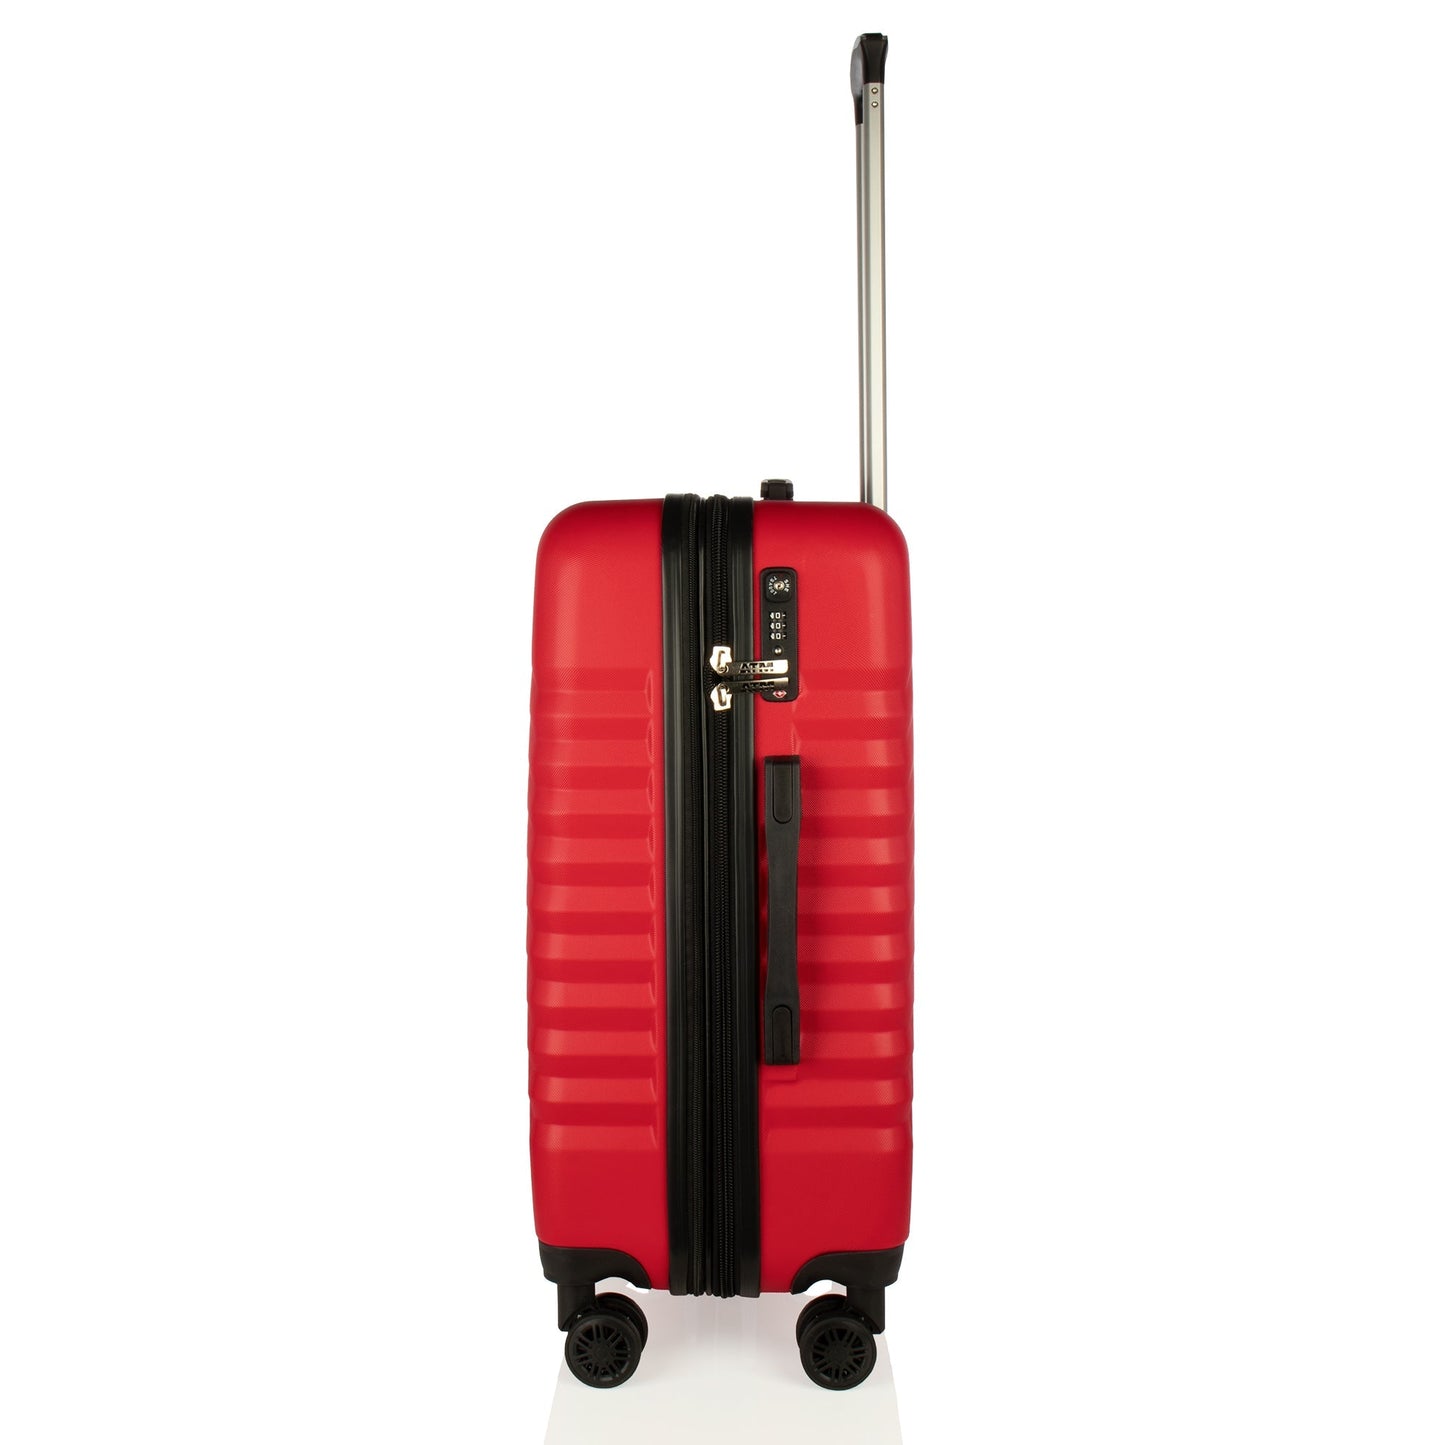 Core Collection Luggage Red (20/24/28") Suitcase Lock Spinner